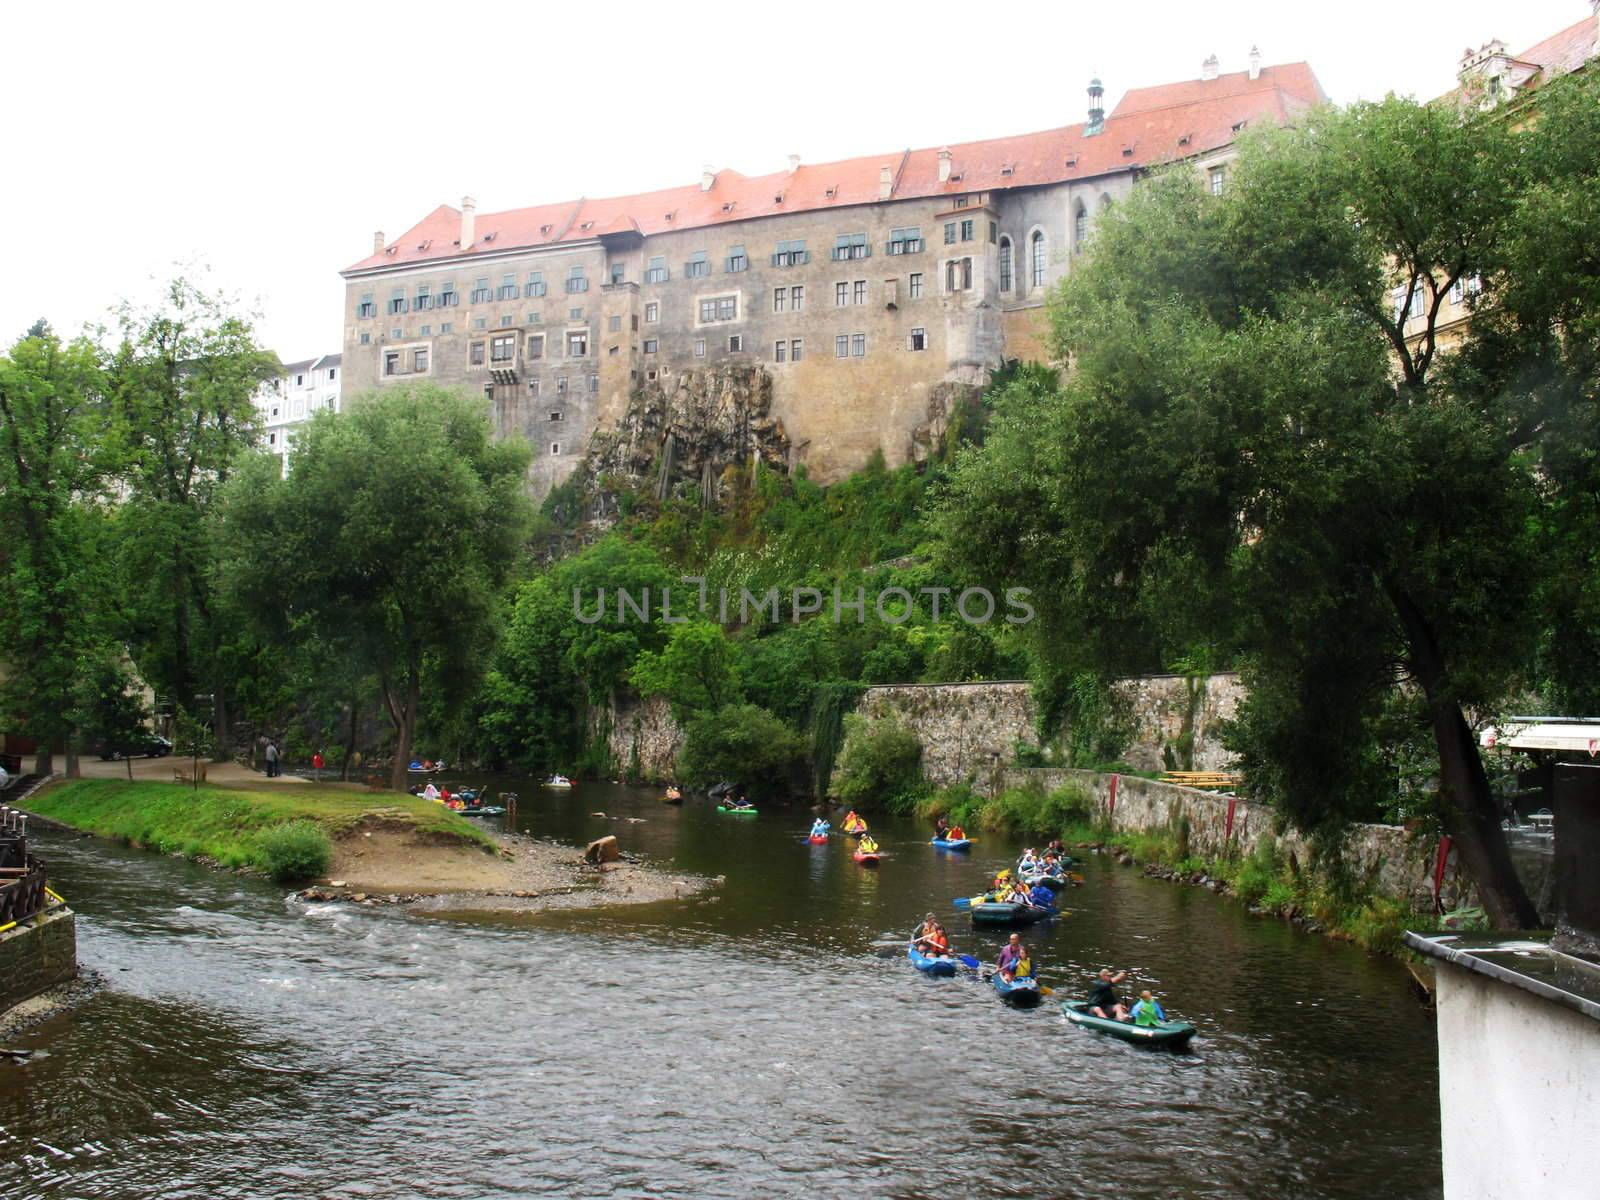 Mini rafting on river under walls of ancient castle